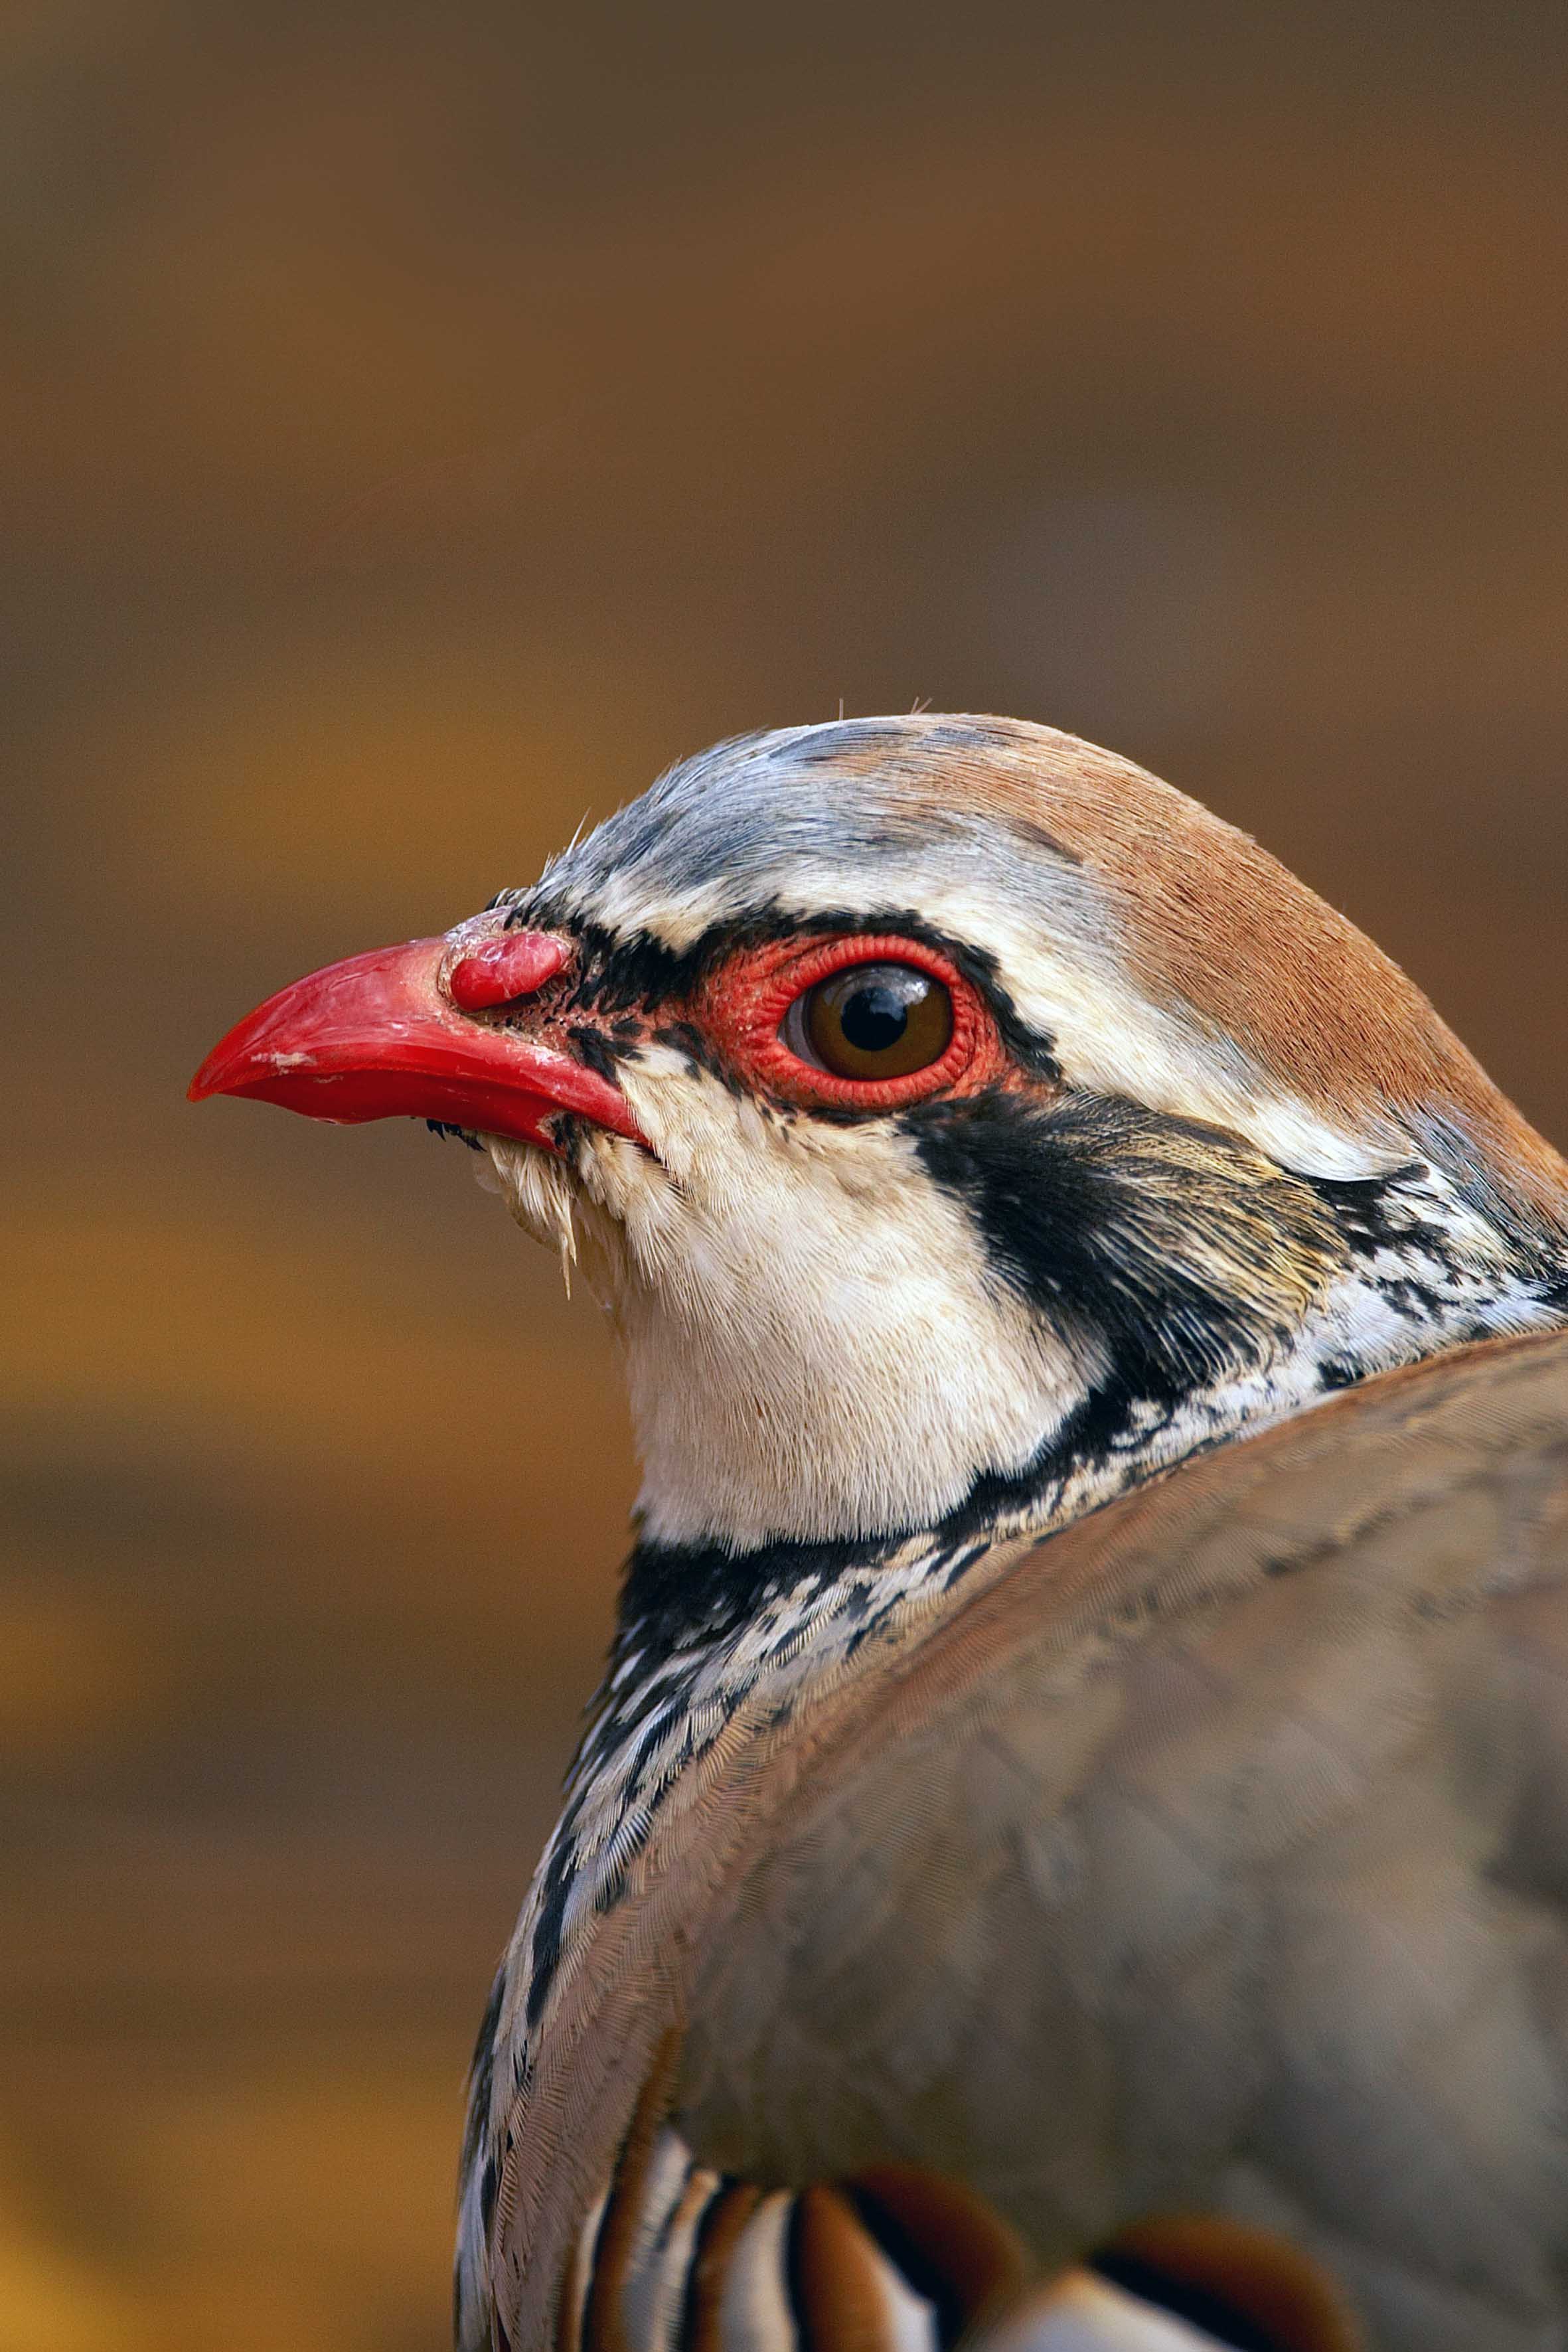 The head of the red-legged partridge (Alectoris rufa) showing ornaments produced by carotenoid pigments (bill and eye rings). Foto: Rafael Palomo.